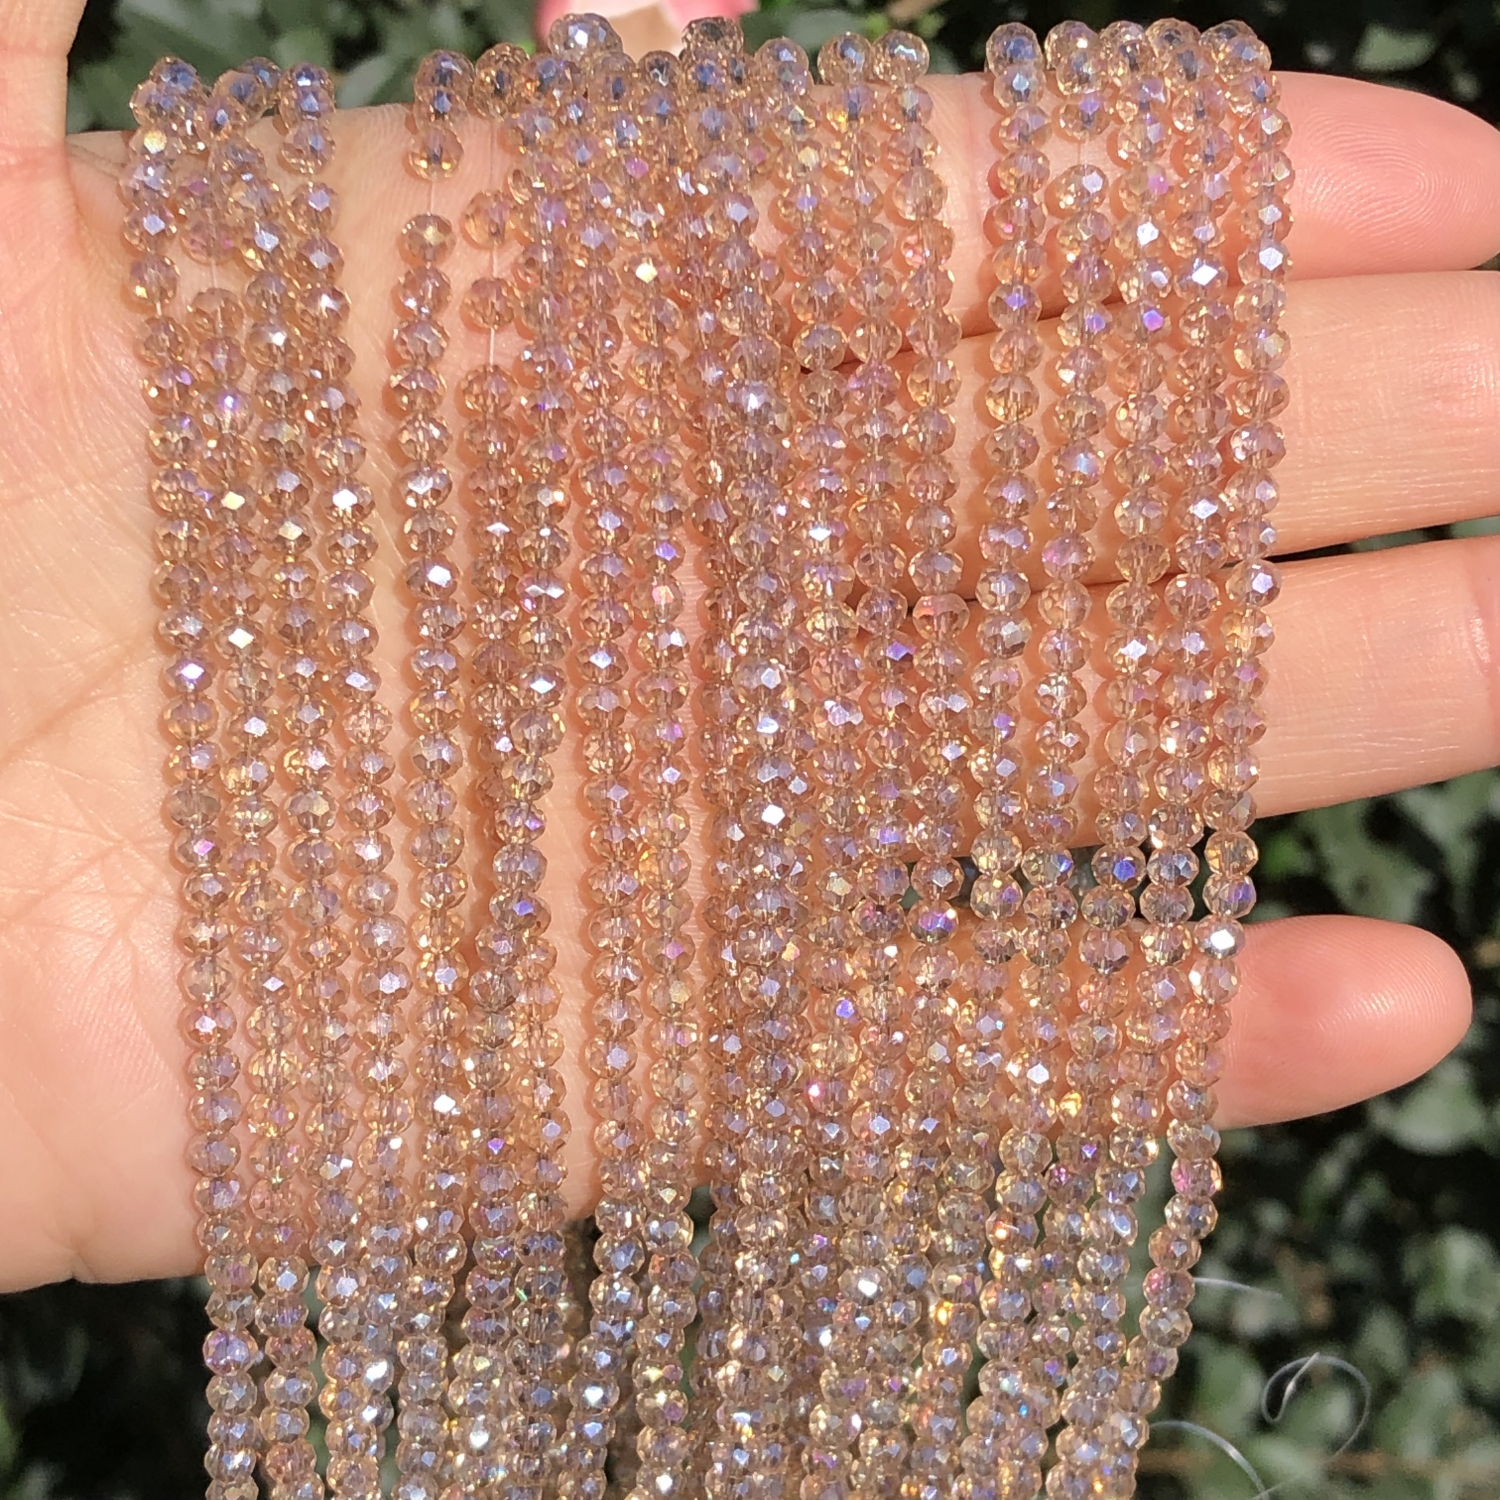  400 Pieces Crystal Rondelle Beads Loose Beads Acrylic Star  Heart Round Faceted Rondelle Beads Transparent Round Beads for Girls  Bracelets Jewelry Hair Accessories Making Supplies (Chic Style) : Arts,  Crafts 